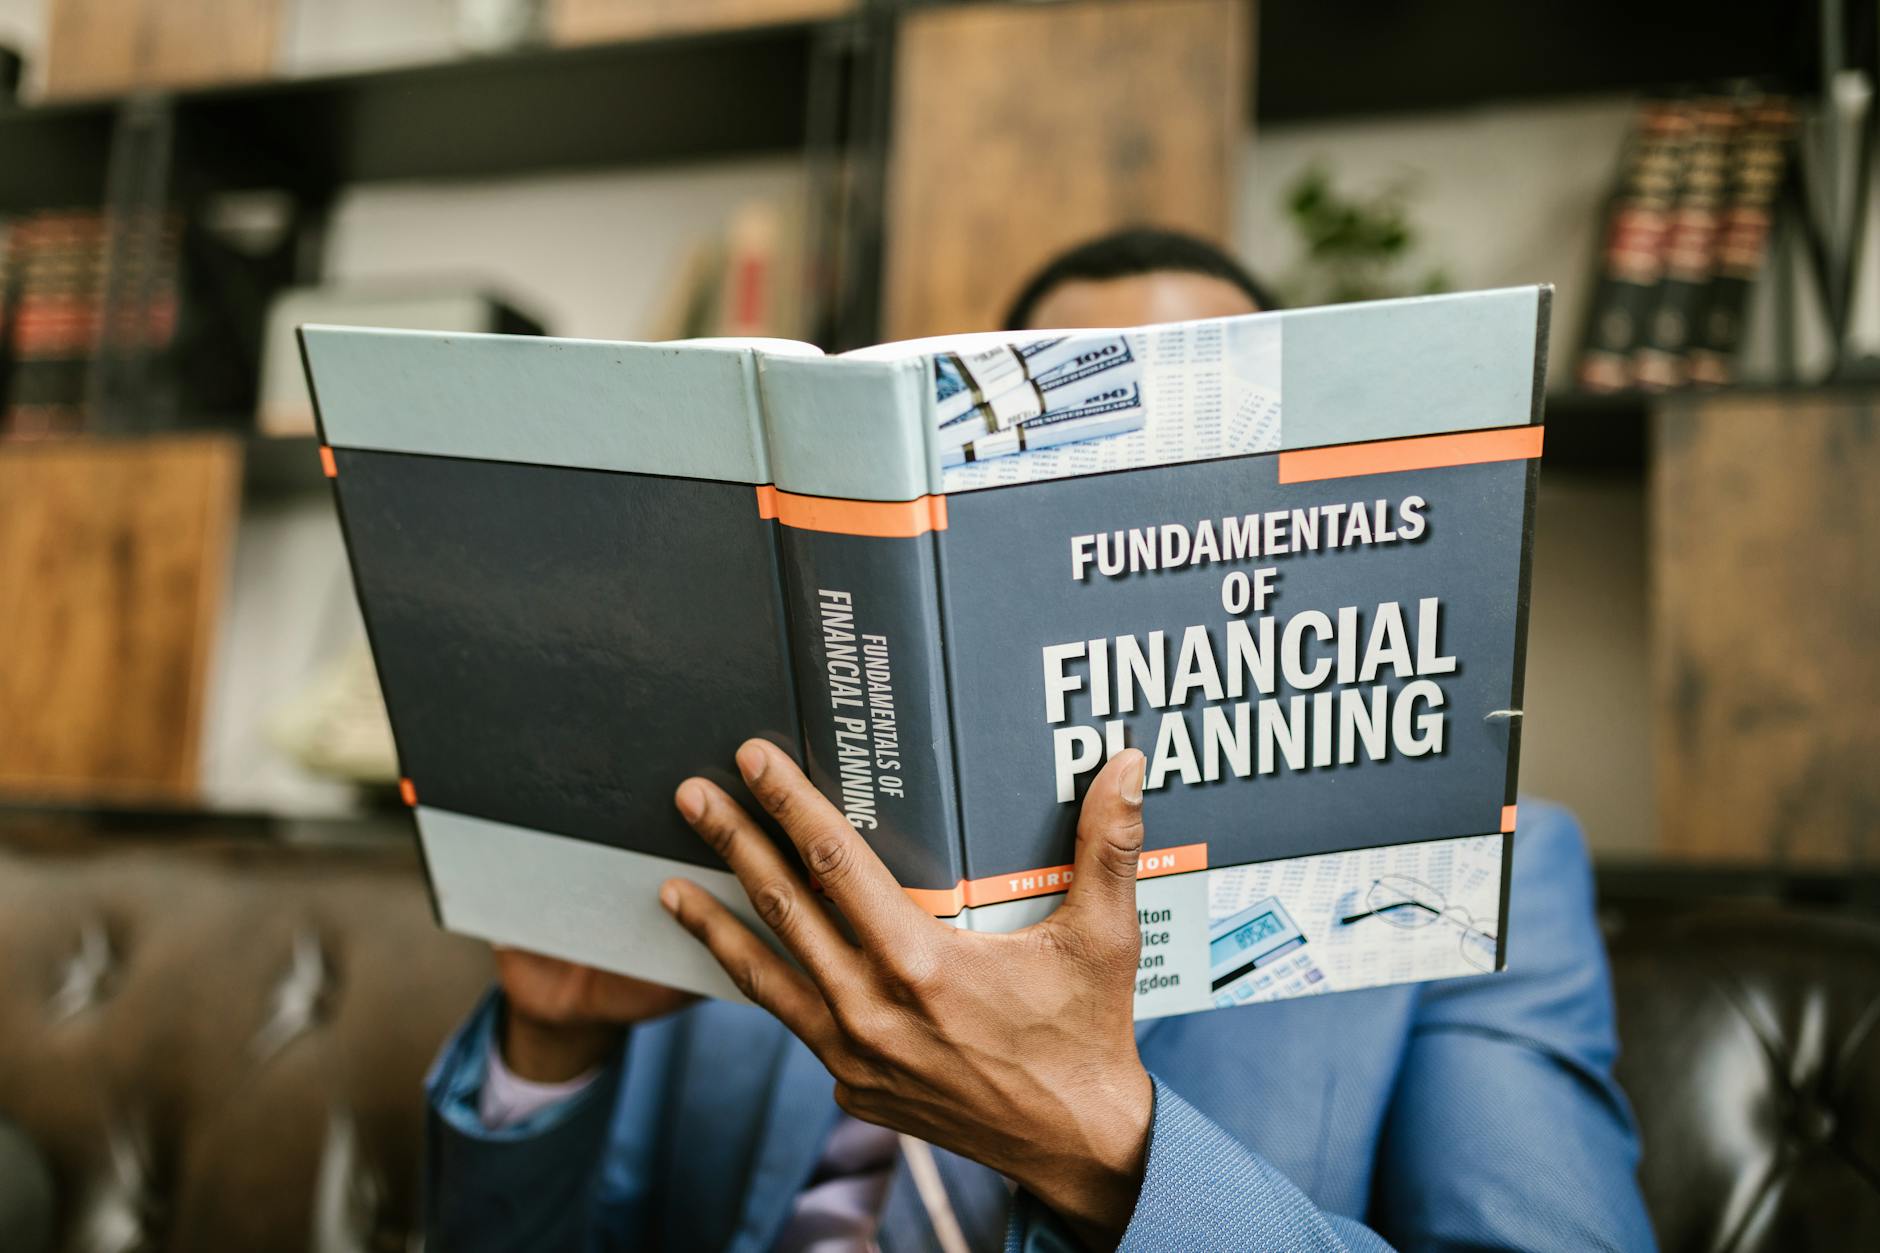 Person Reading a Book About Fundamentals of Financial Planning